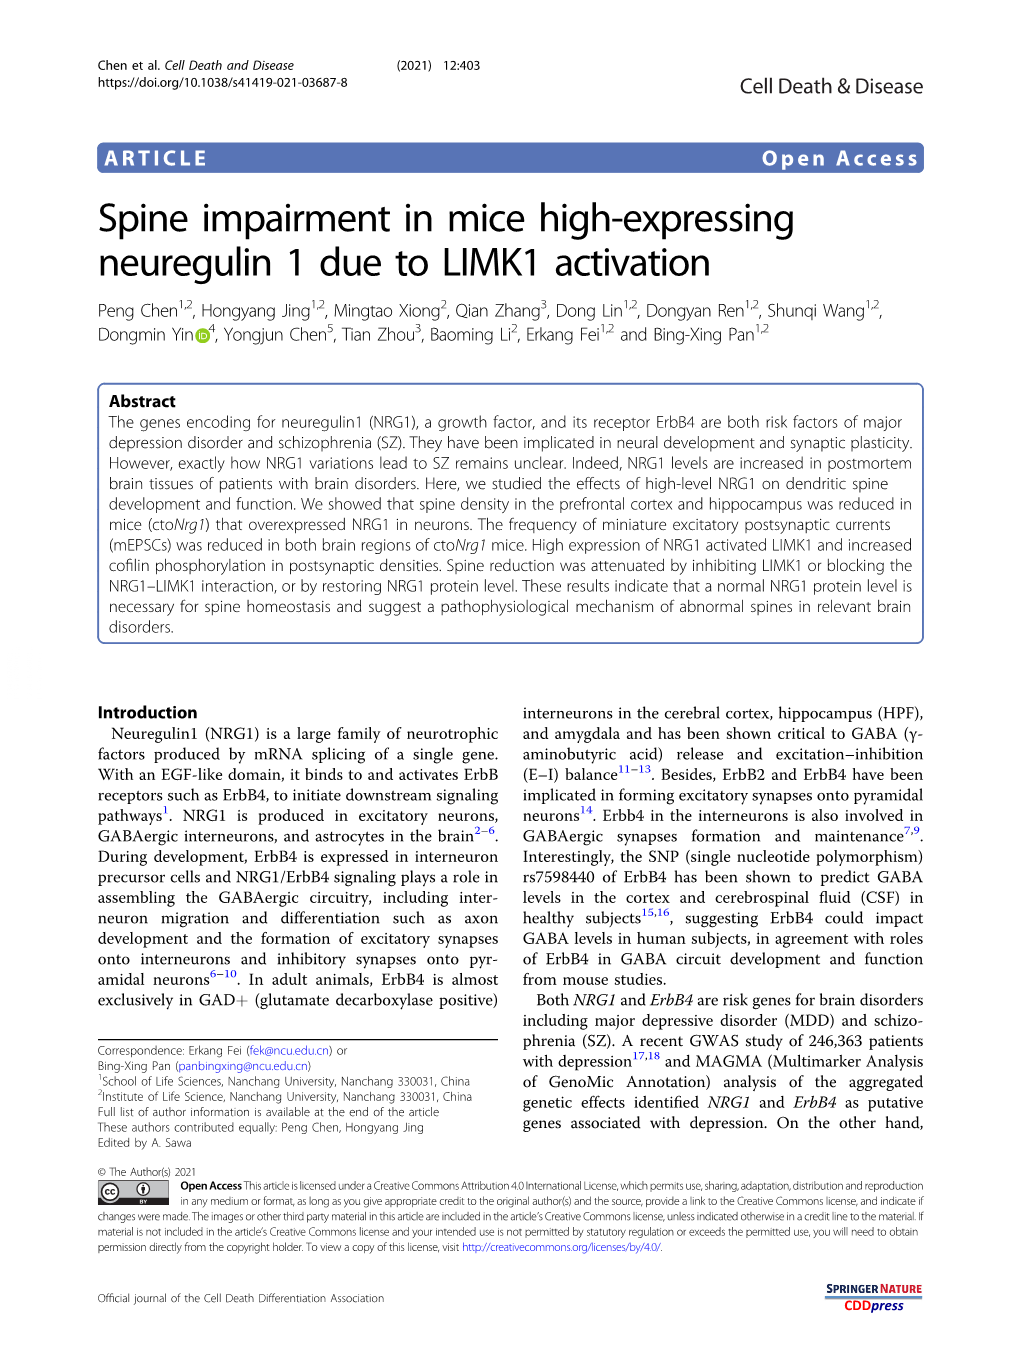 Spine Impairment in Mice High-Expressing Neuregulin 1 Due